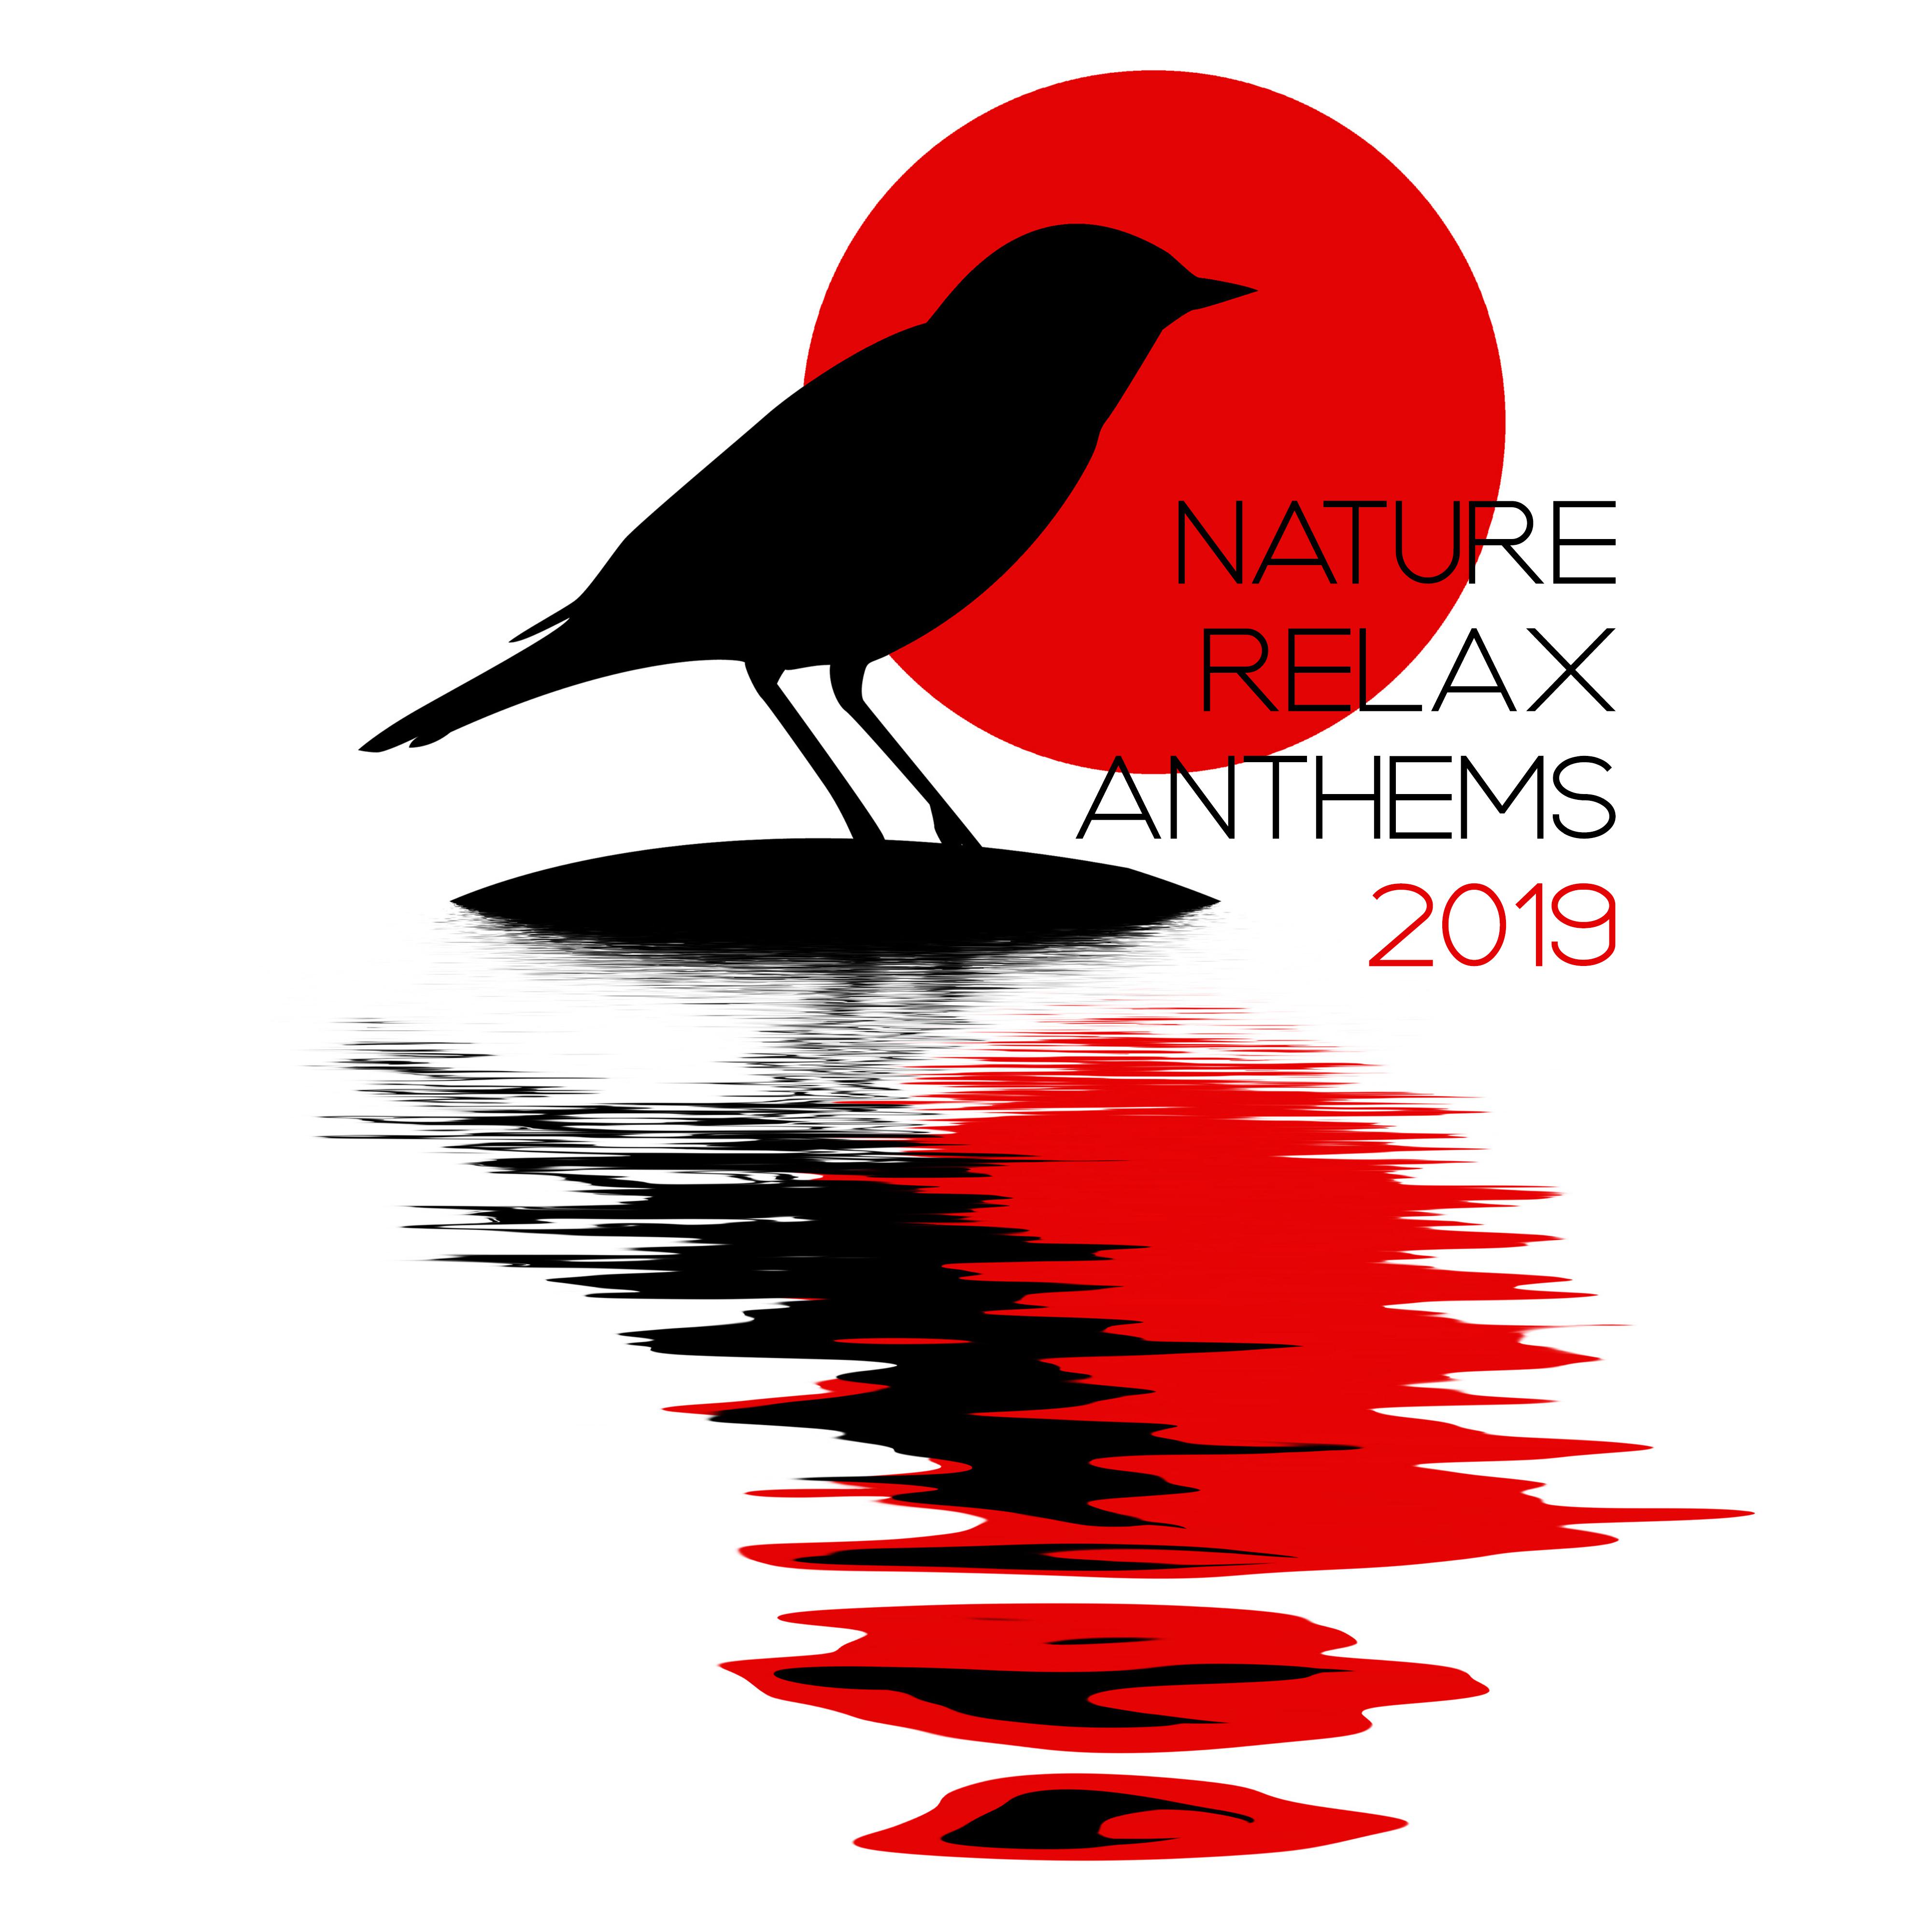 Nature Relax Anthems 2019: Compilation of Beautiful New Age Music, Sounds of Birds, Forest, Meadow, Water for Total Relaxation & Calming Down, Stress Relief Songs